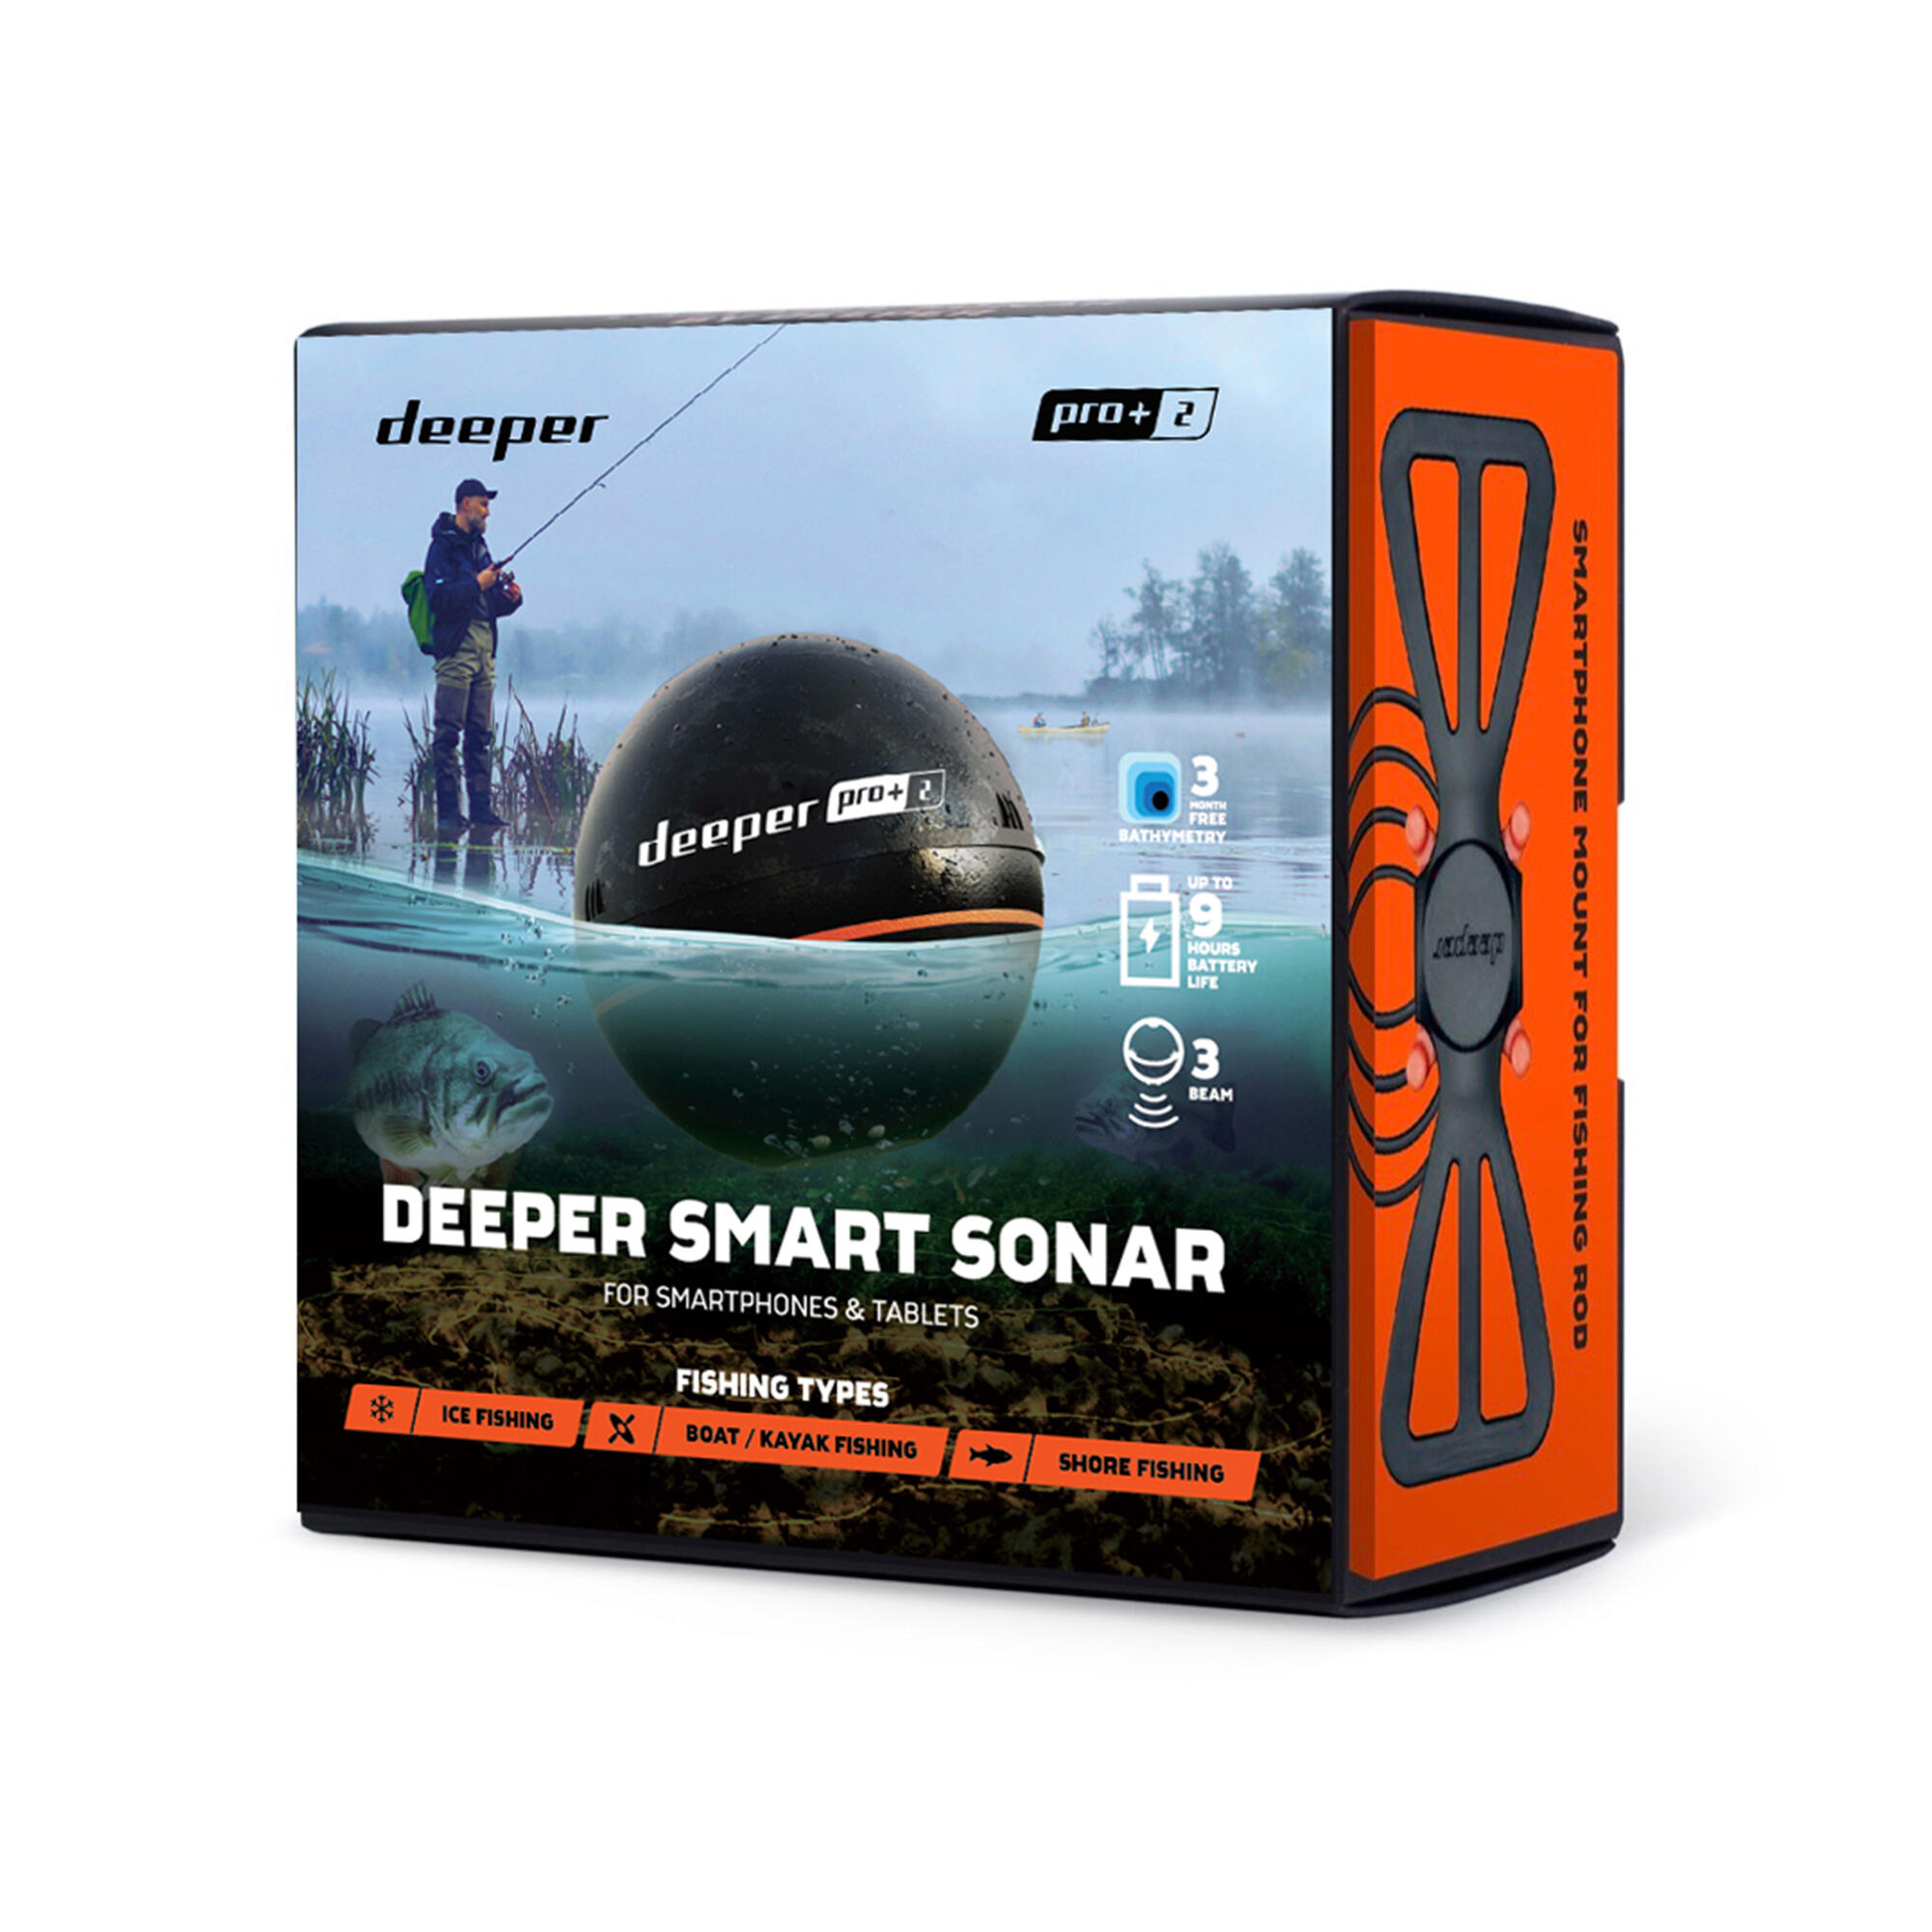 Deeper PRO Castable And Portable WiFi Fish Finder Depth, 60% OFF